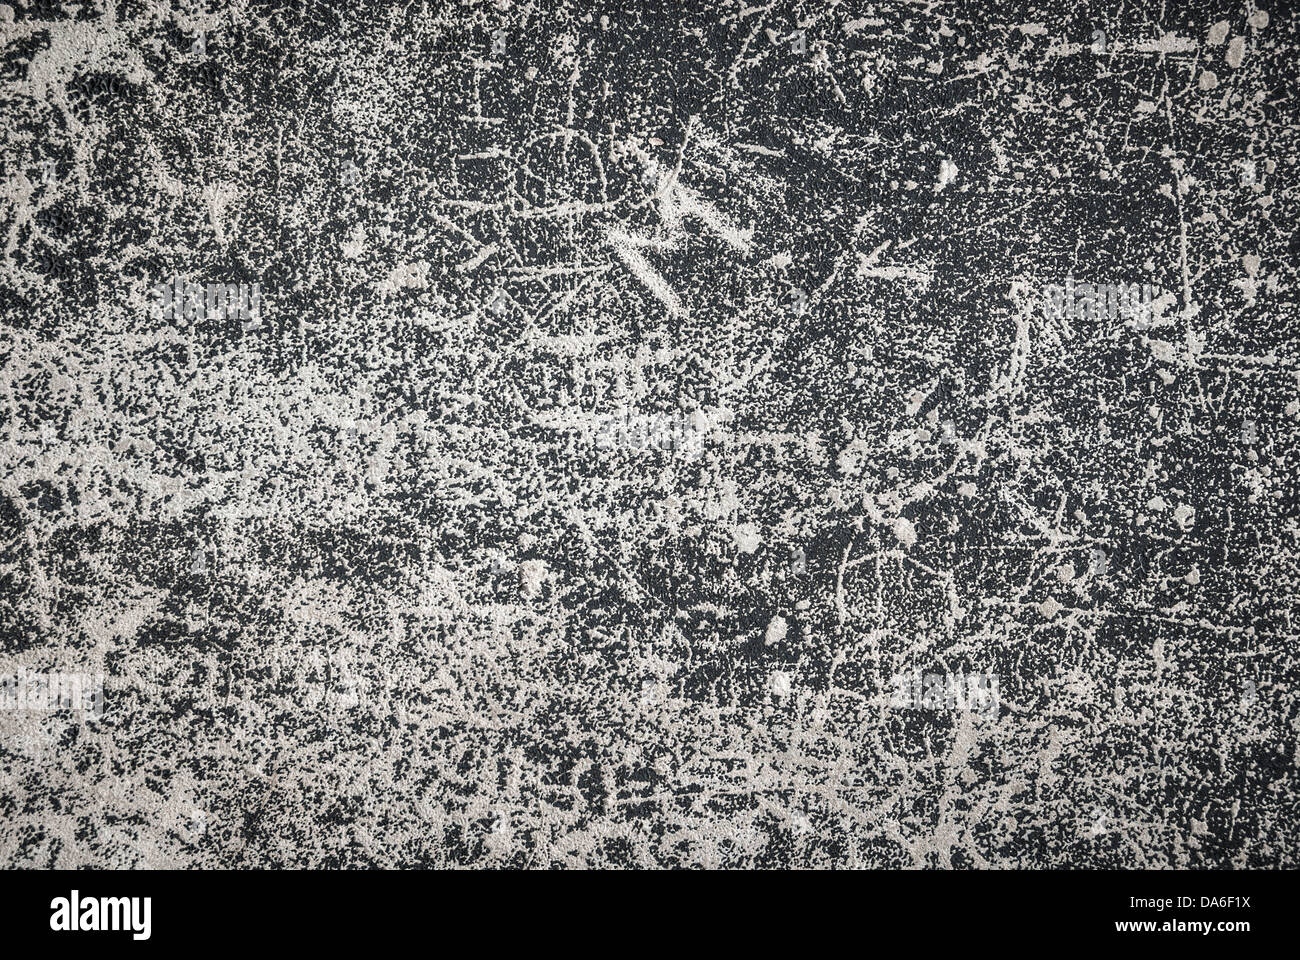 Scratched concrete surface background. Stock Photo